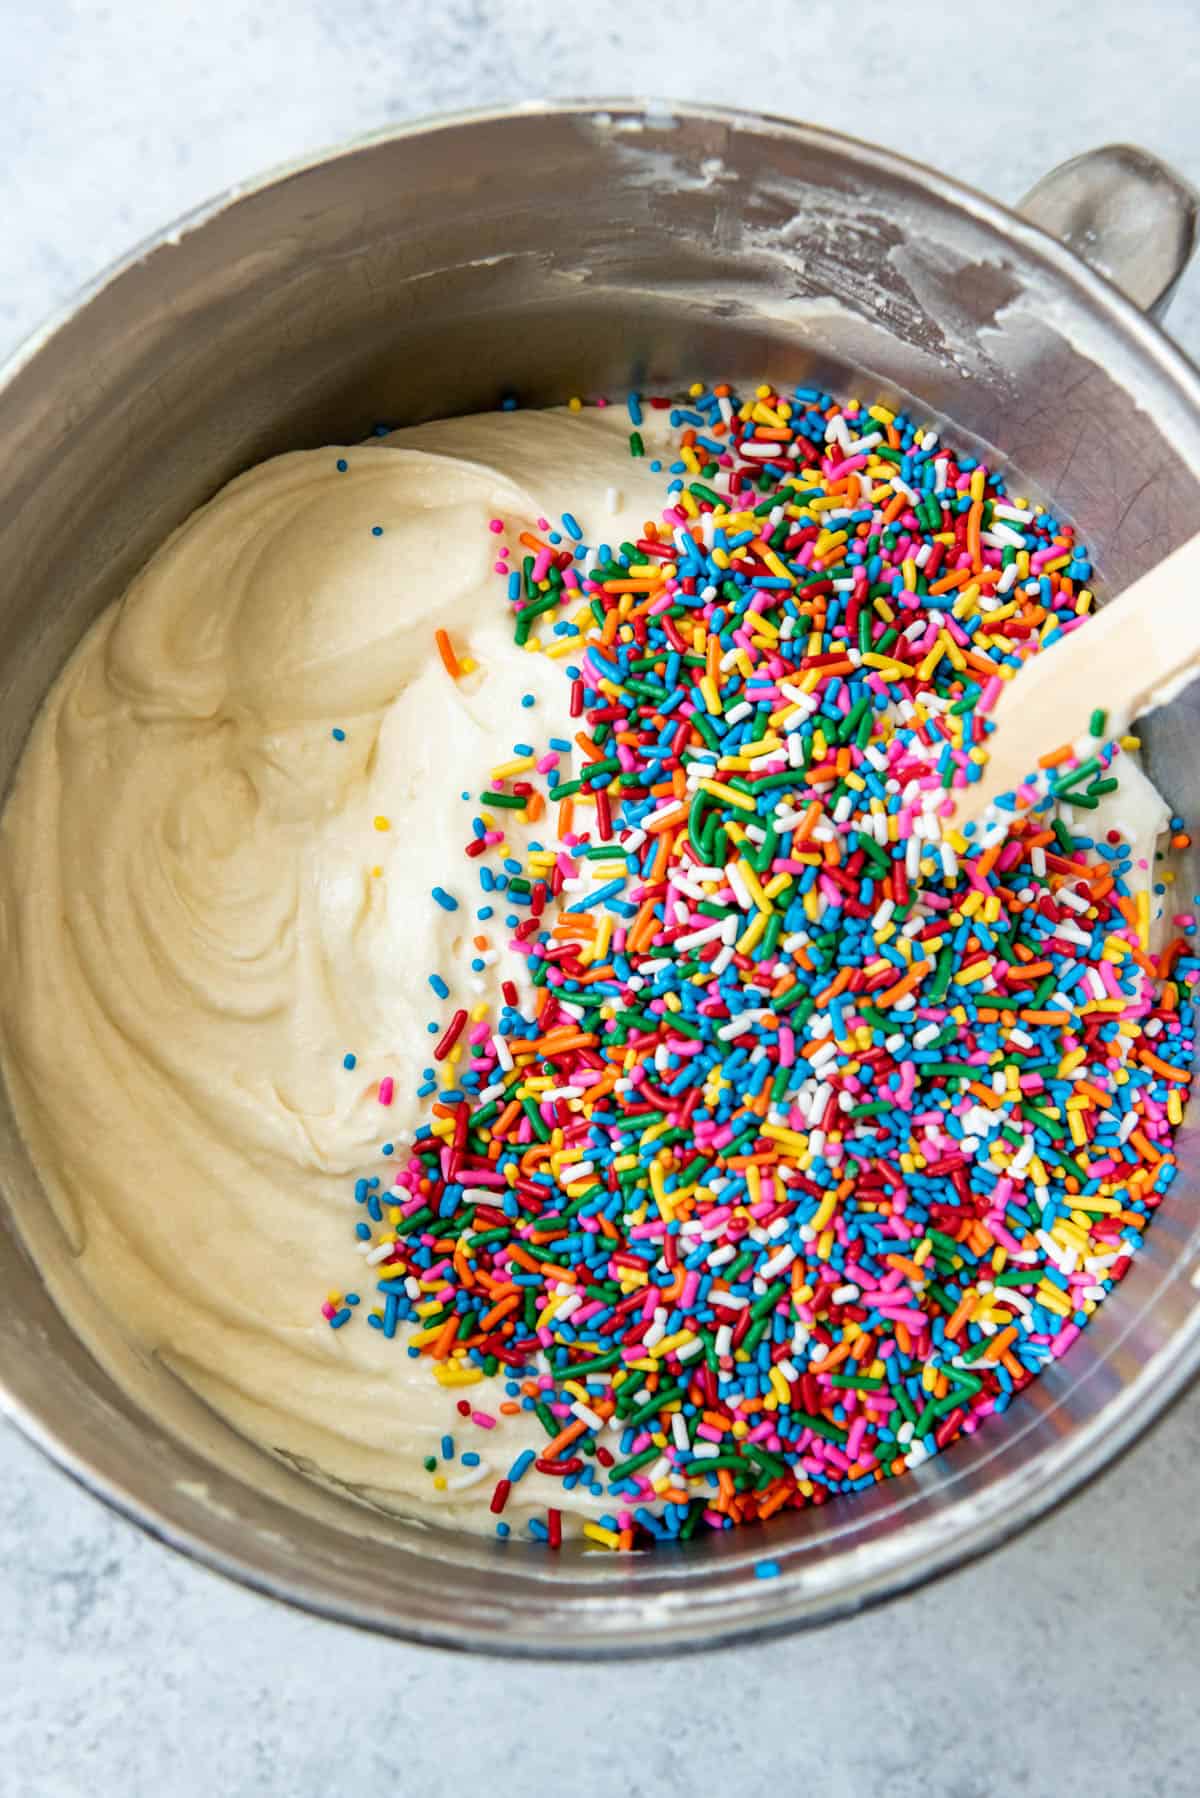 An image of Sprinkles in a mixing bowl with homemade funfetti cake batter about to mixed in.